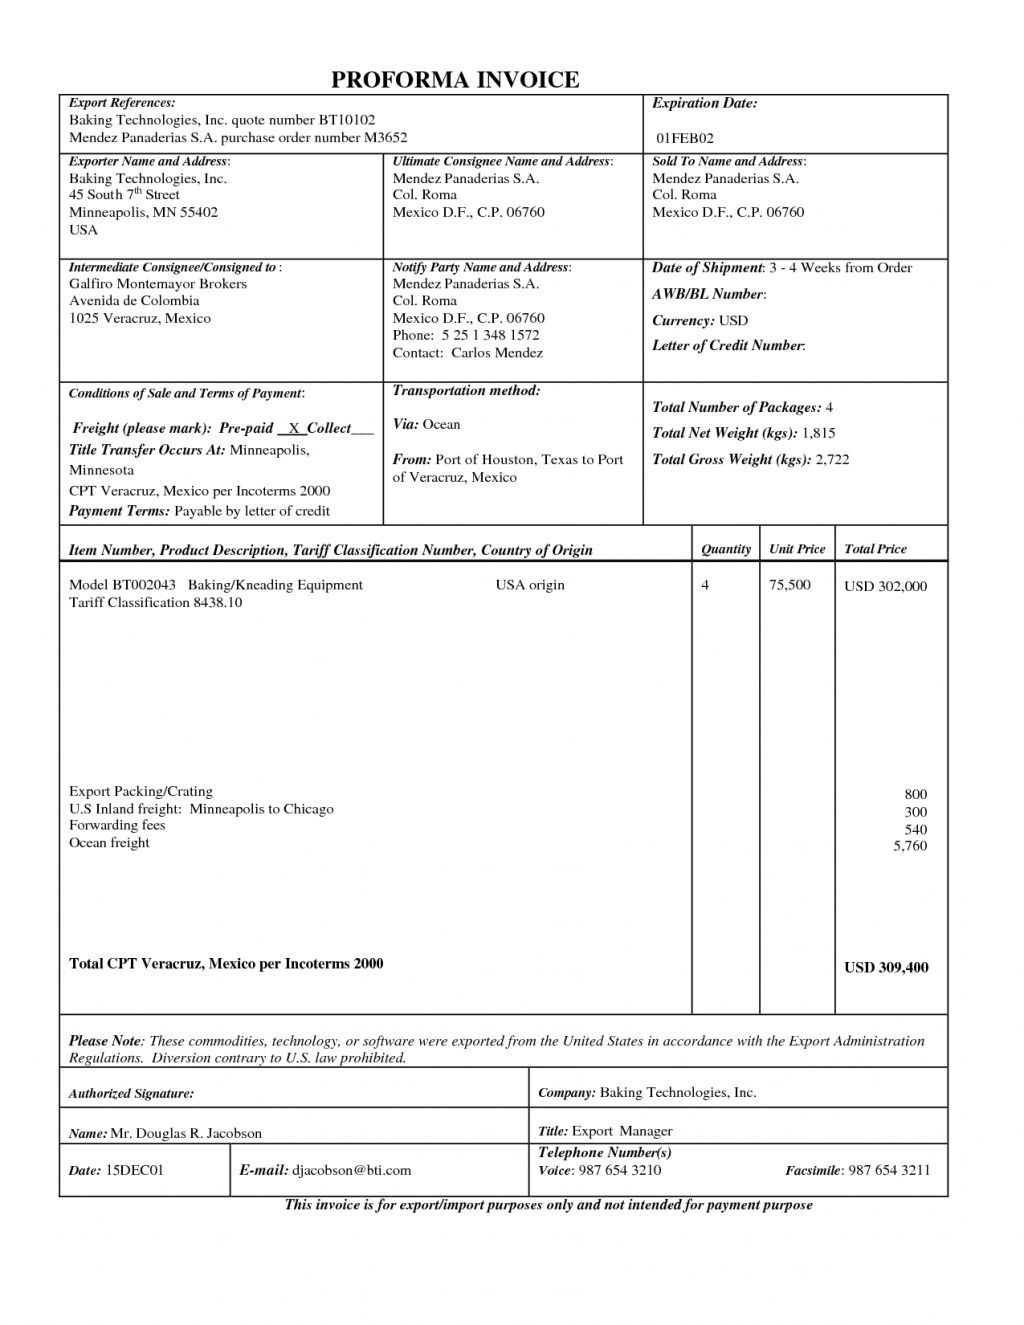 Proforma Invoice Sample For Export